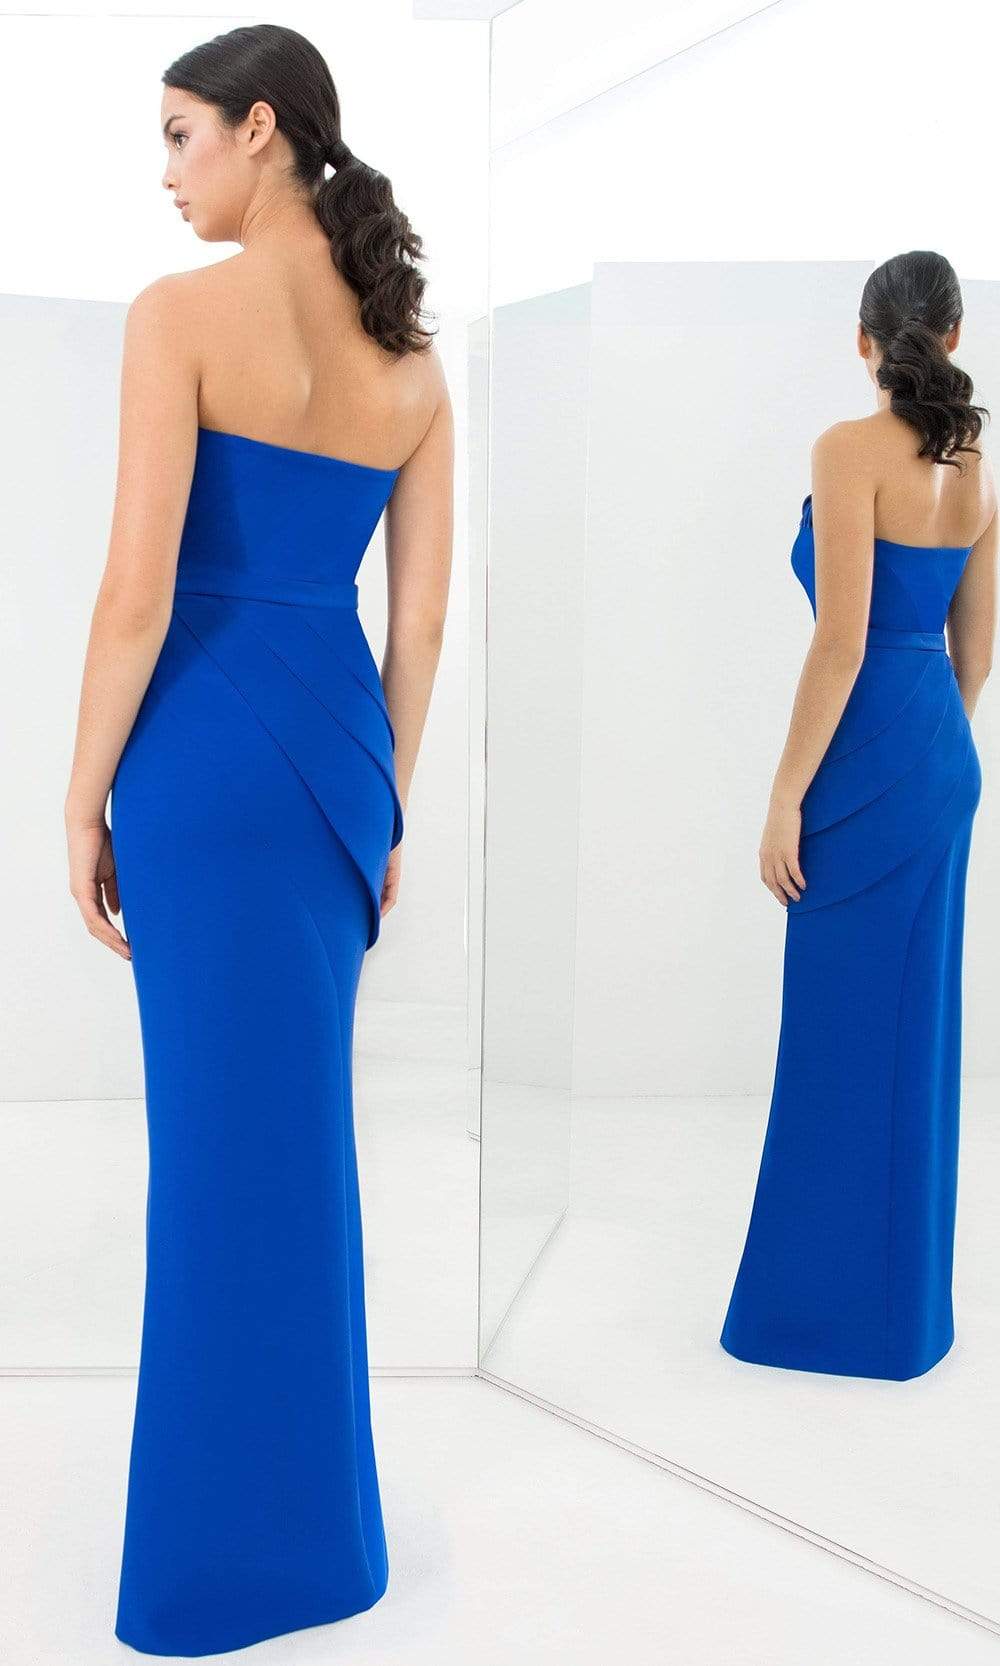 Alexander By Daymor - 1381 Strapless Pleated Sheath Dress With Slit Evening Dresses 00 / Blue